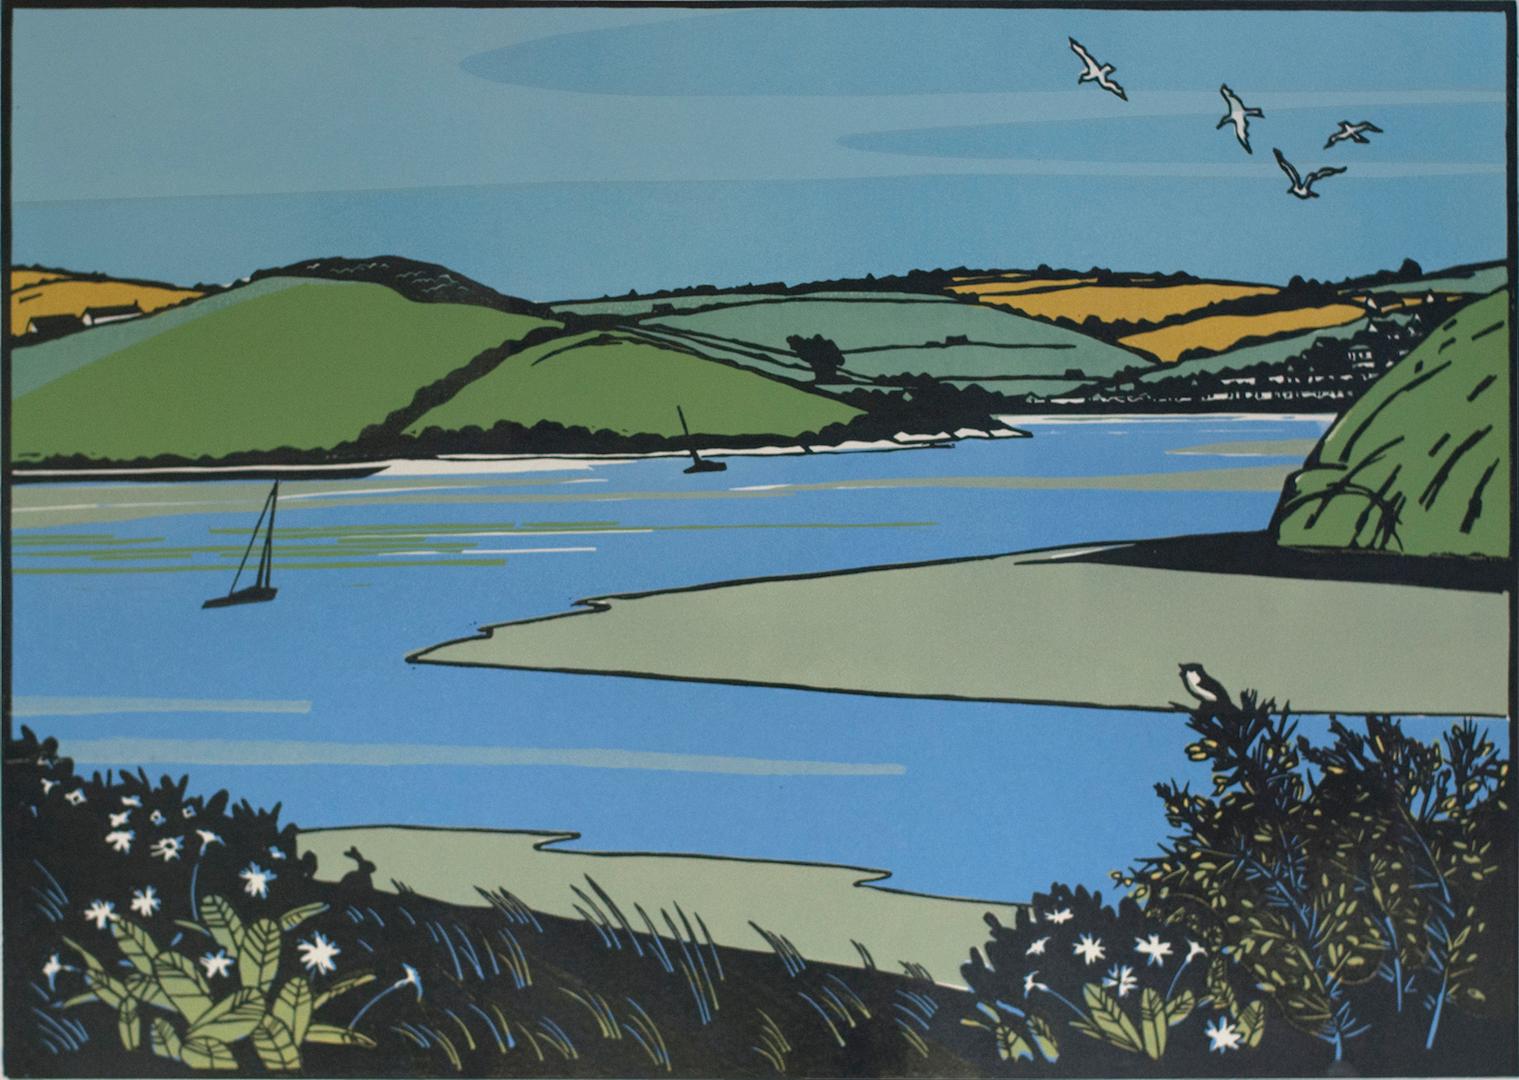 Colin Moore
The Camel Trail in Spring
Limited Edition 3 Block Linocut Print
Edition of 100
Image Size: H 42cm x W 59.5cm
Sheet Size: H 51cm x W 67cm x D 0.1cm
Sold Unframed
Please note that in situ images are purely an indication of how a piece may